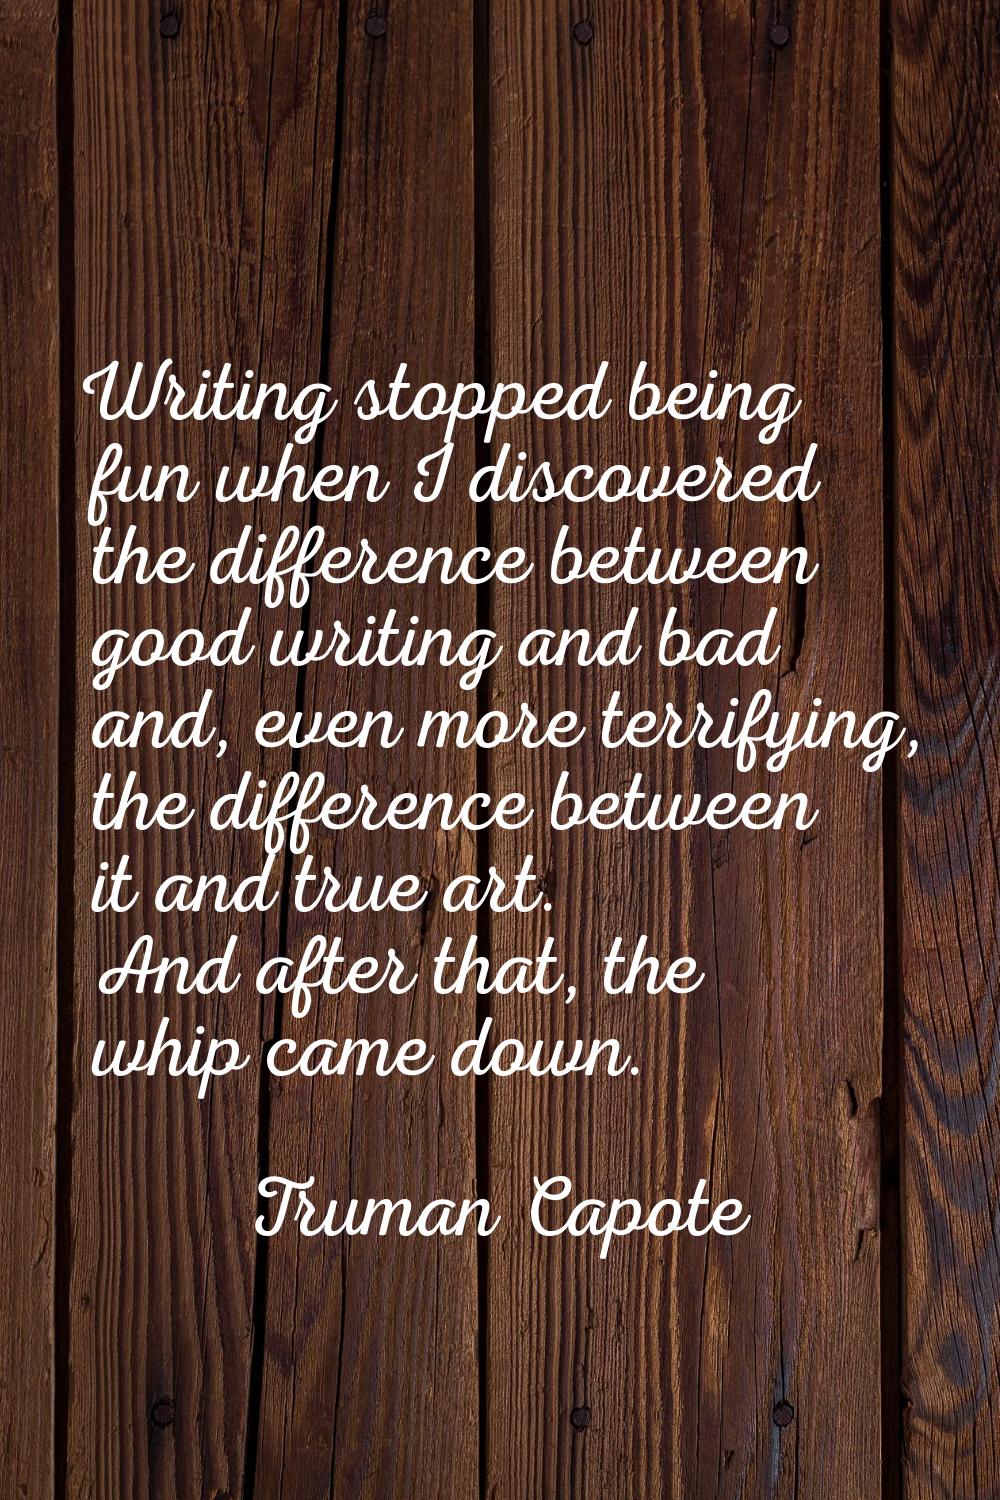 Writing stopped being fun when I discovered the difference between good writing and bad and, even m